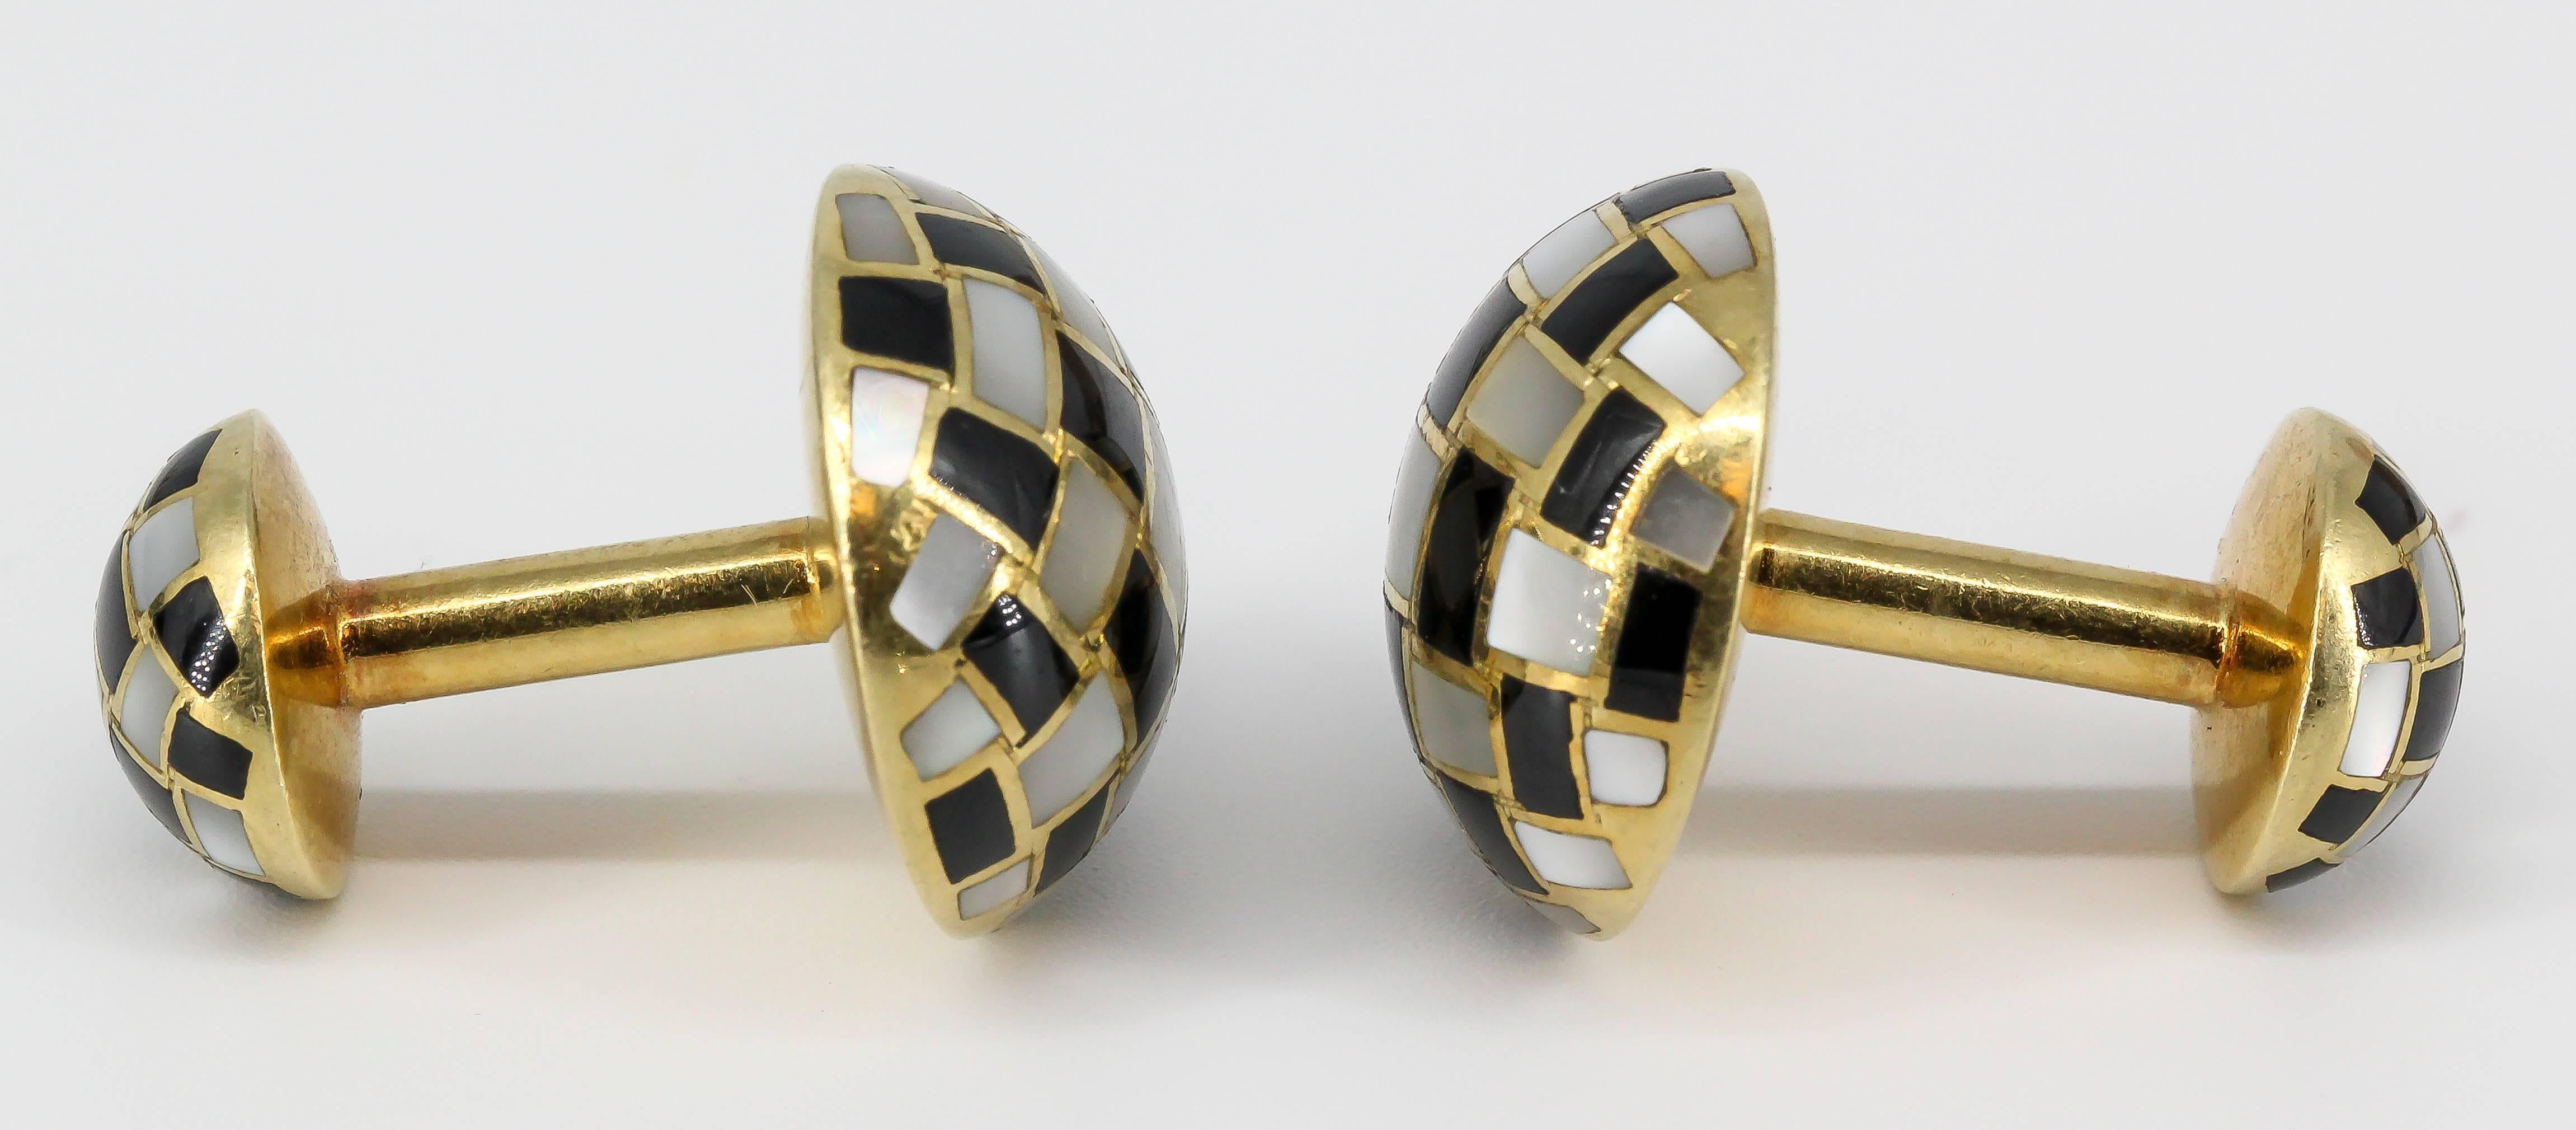 Tiffany & Co. Inlaid Black Jade, Mother-of-Pearl and Gold Cufflinks 1